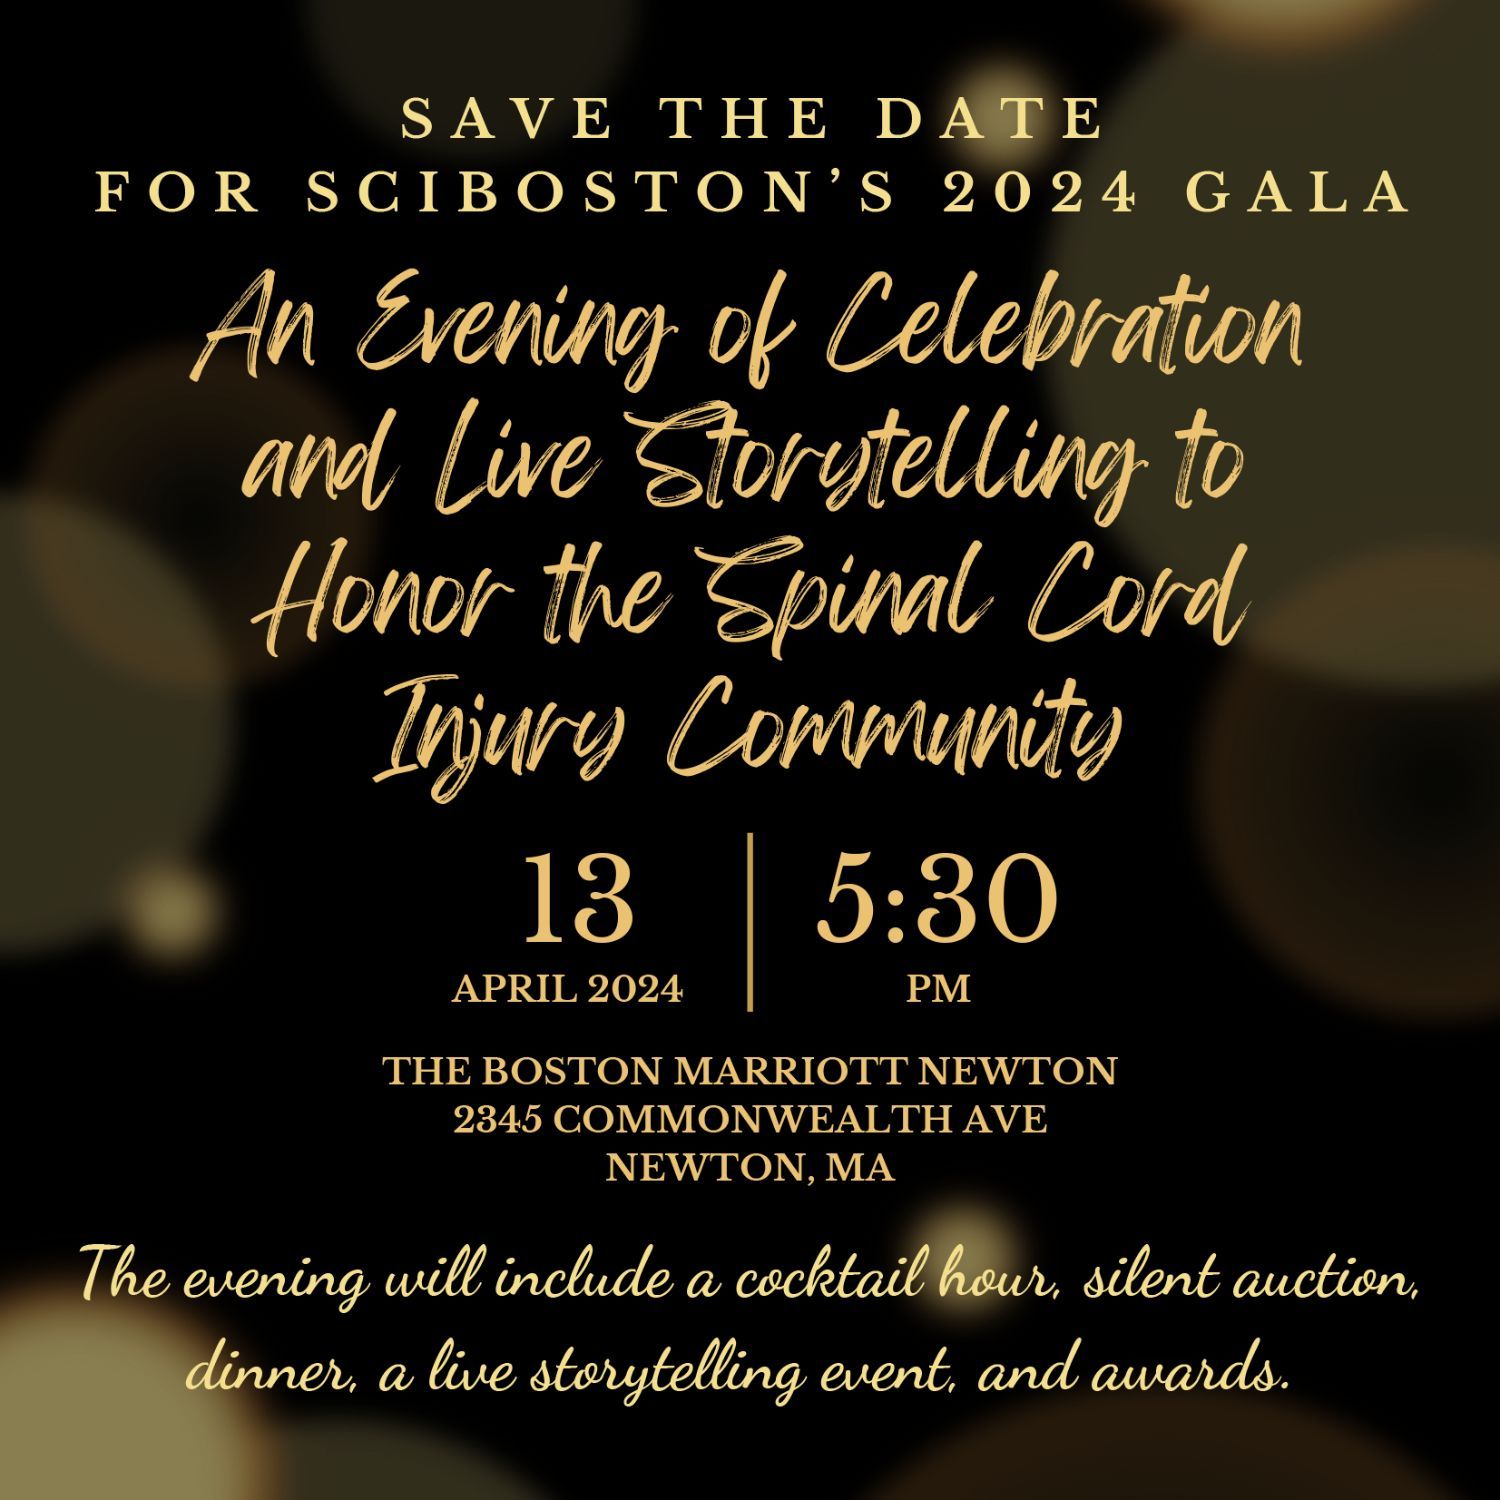 SAVE THE DATEAn Evening of Celebration and Live Storytelling to Honor the Spinal Cord Injury CommunityApril 13, 2023 5:30pmThe Boston Marriott Newton2345 Commonwealth AveNewton, MAThe evening will include cocktail hour, silent auction, dinner, he lives storytelling event and awards. More information in ticket sales coming soon!